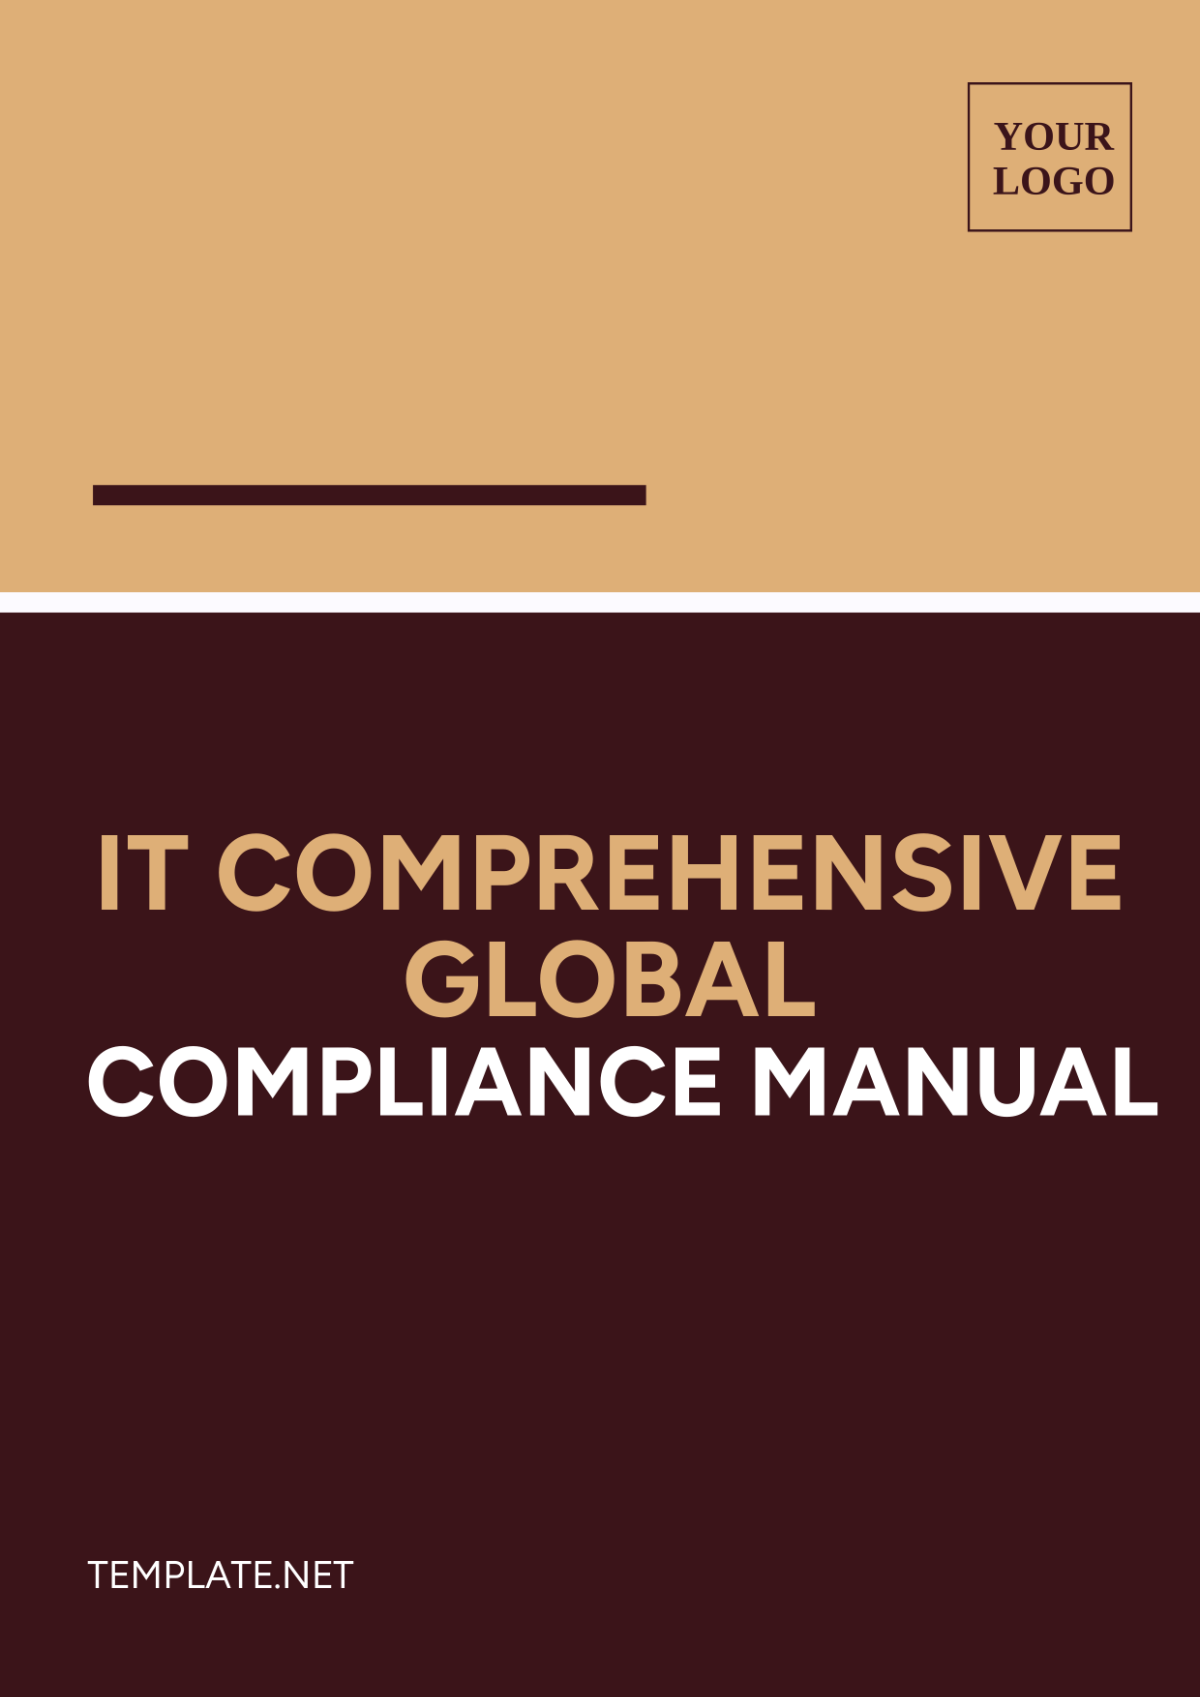 Free IT Comprehensive Global Compliance Manual Template